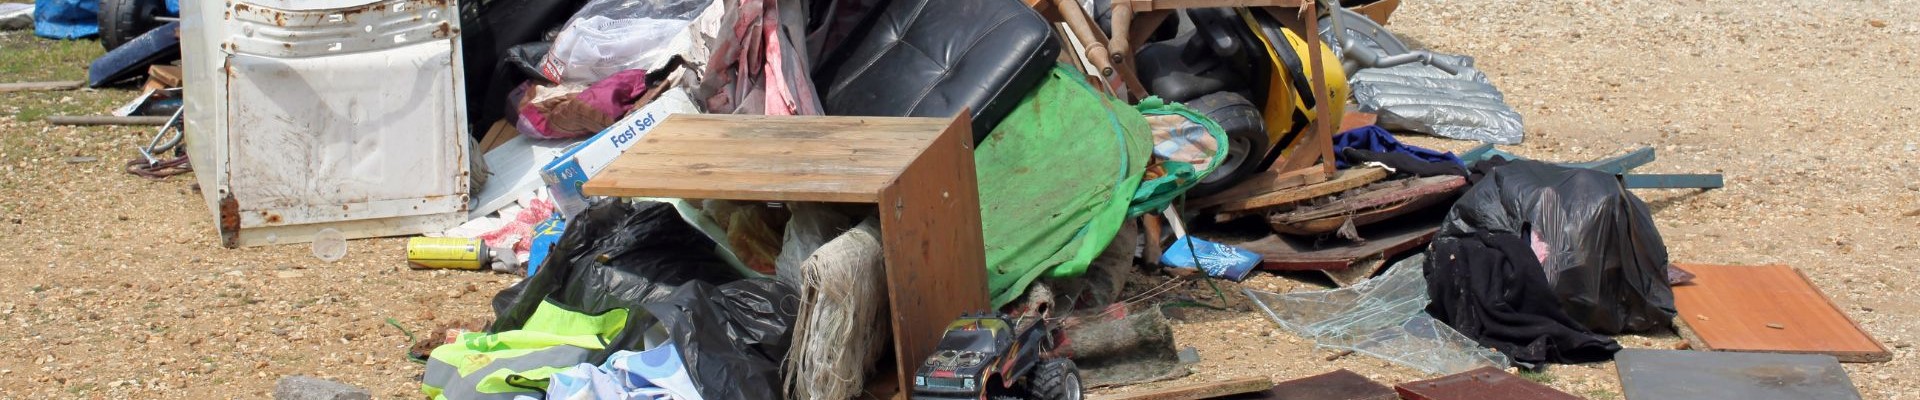 Fly-tipped pile of rubbish and household items